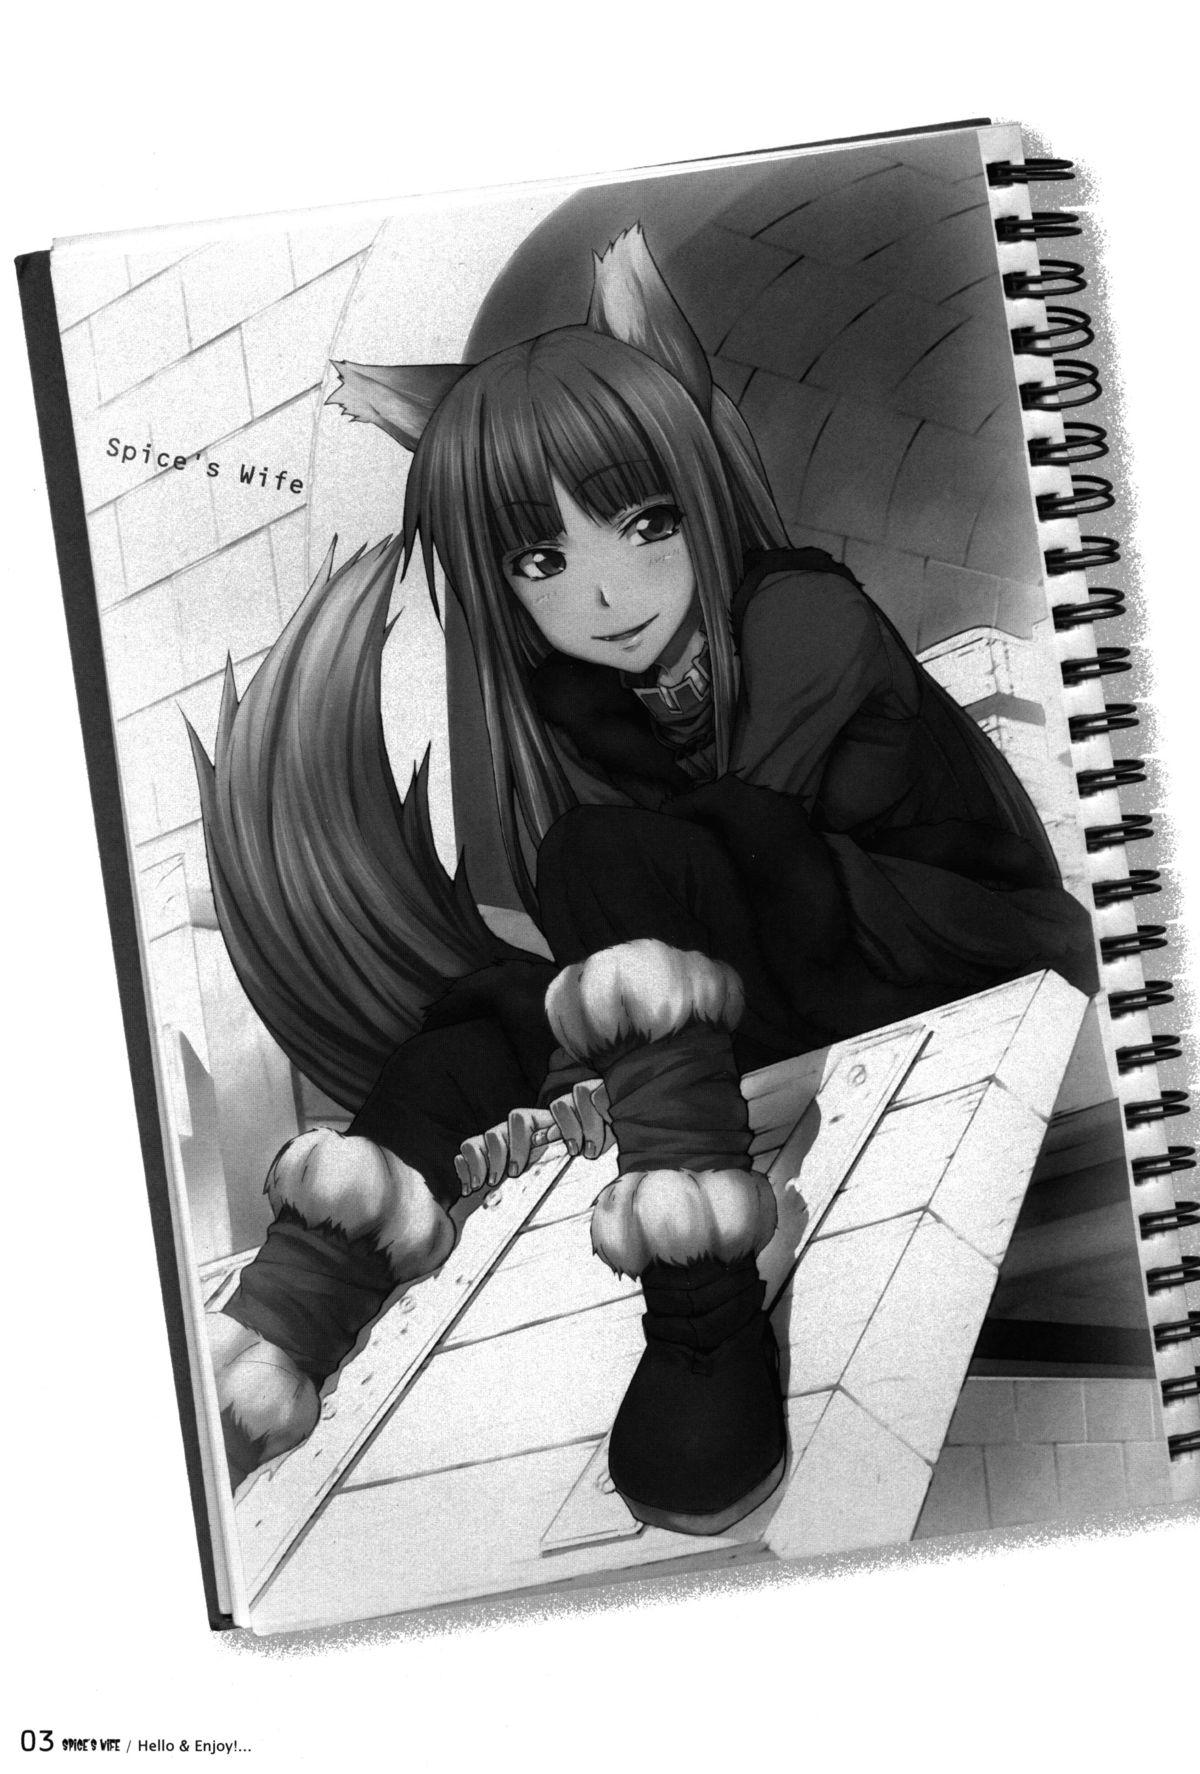 Cougar SPiCE'S WiFE - Spice and wolf Women Sucking - Page 3